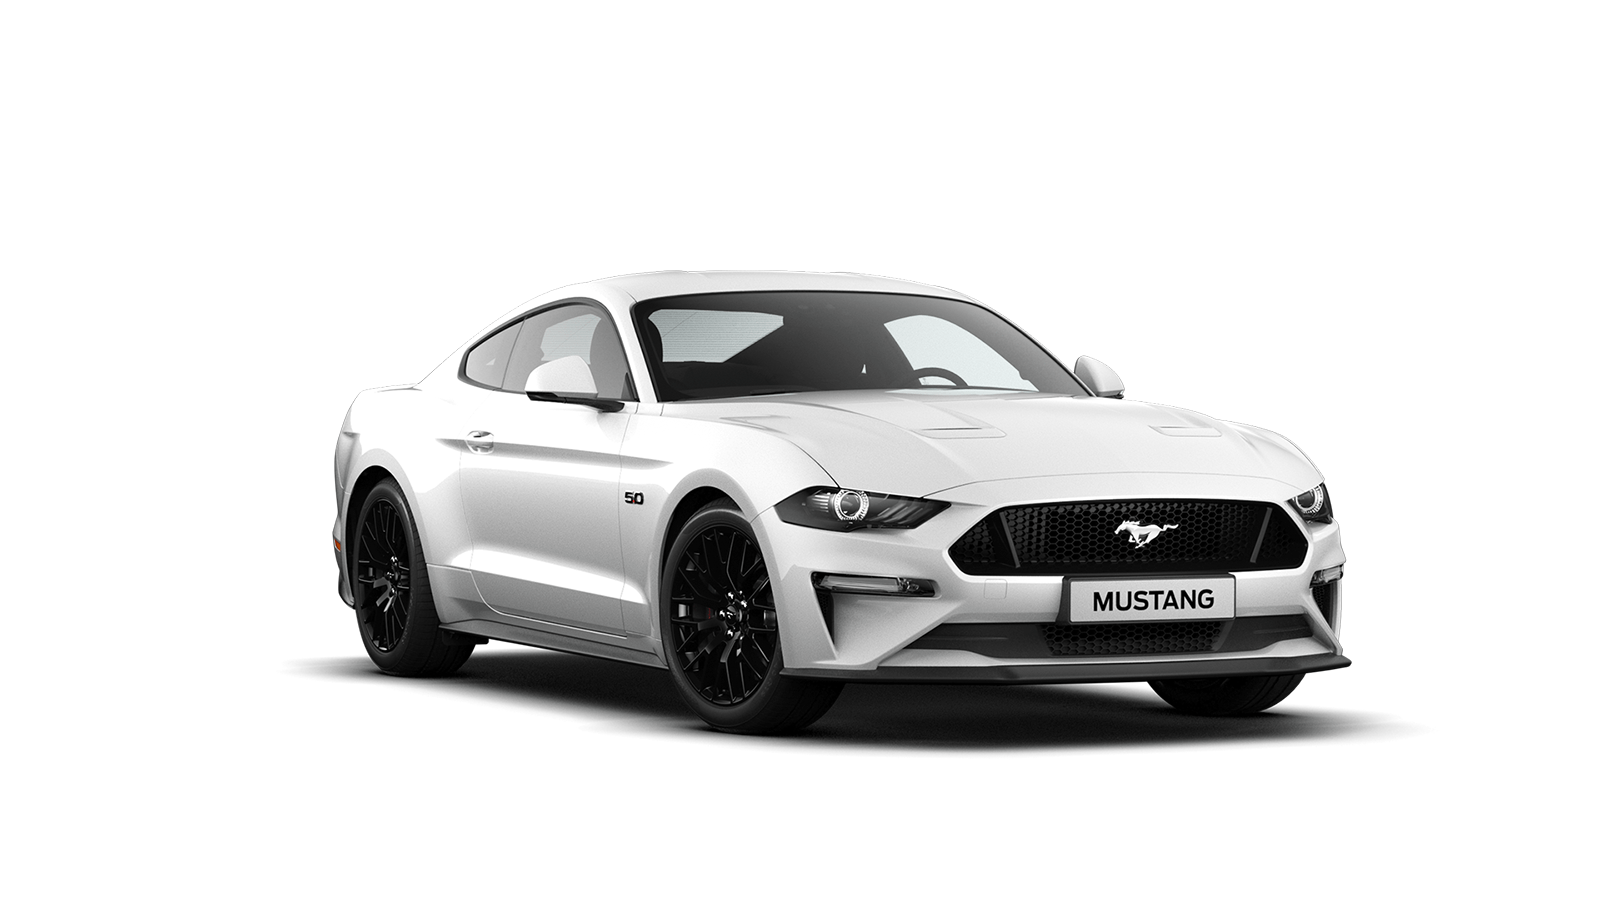 Nouvelle Mustang